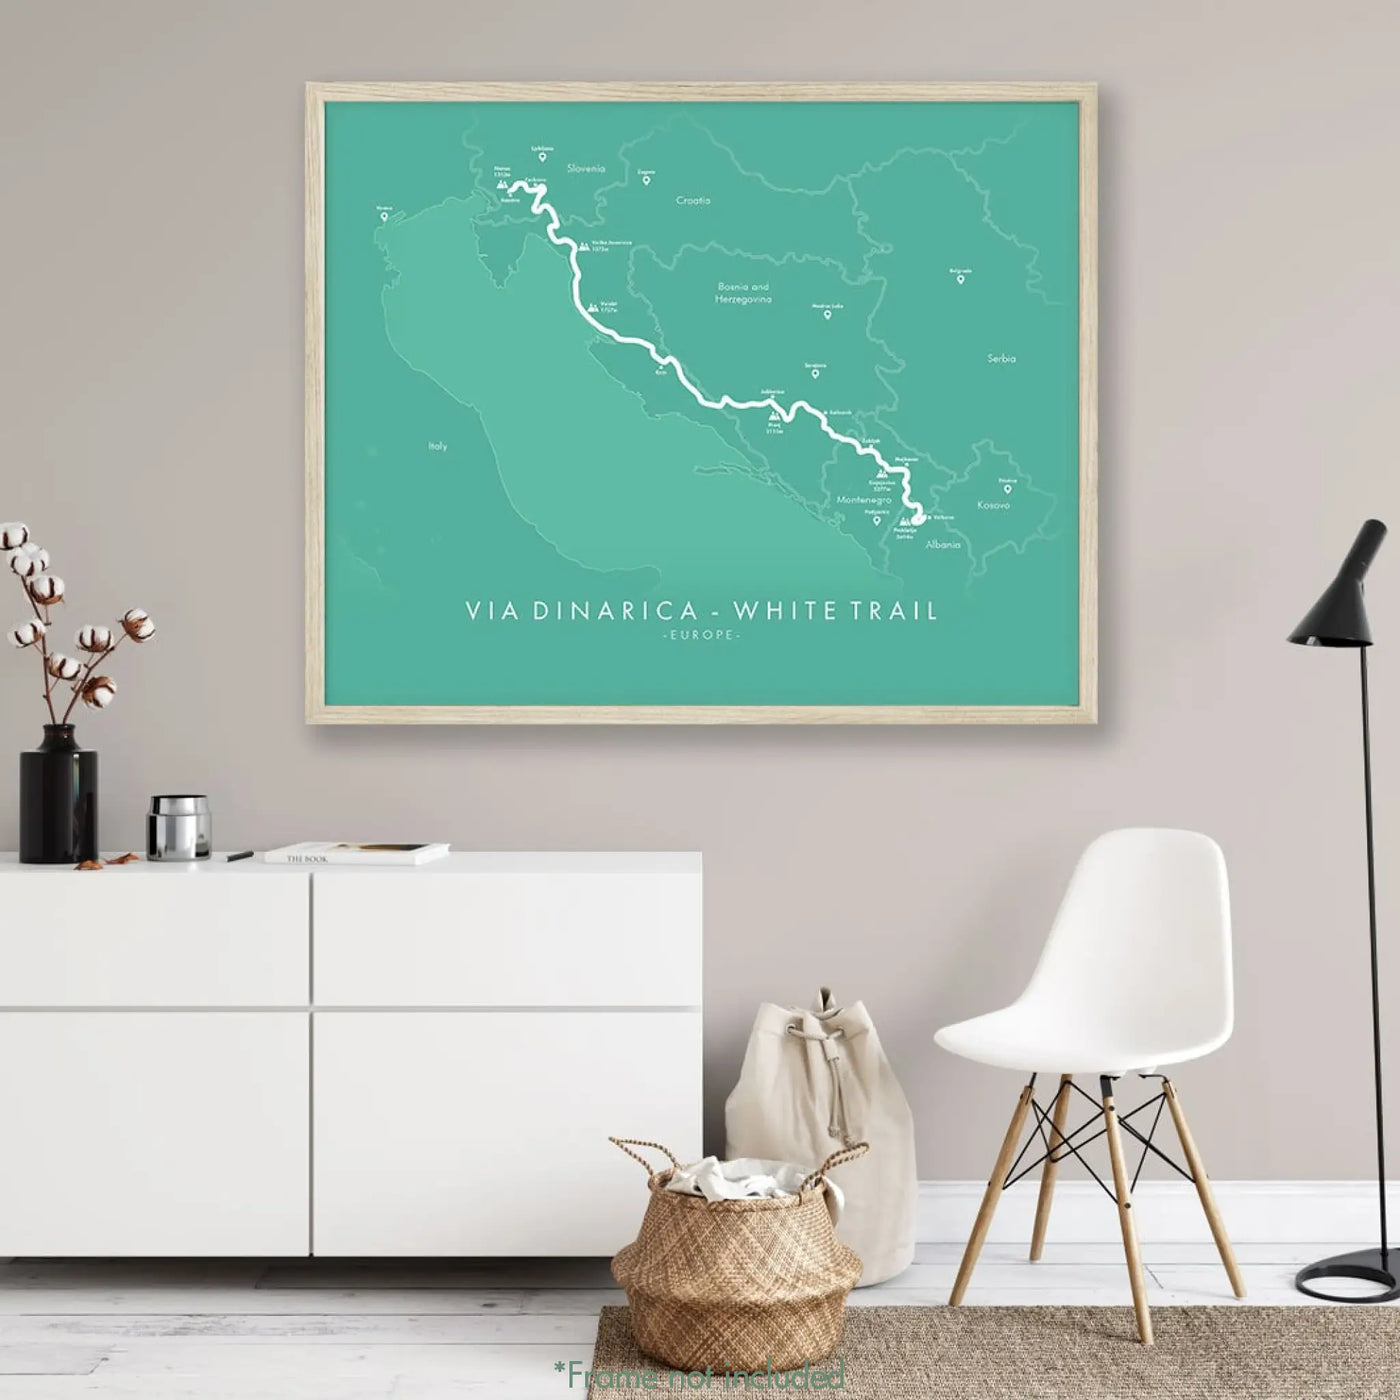 Trail Poster of Via Dinarica - White Trail - Teal Mockup